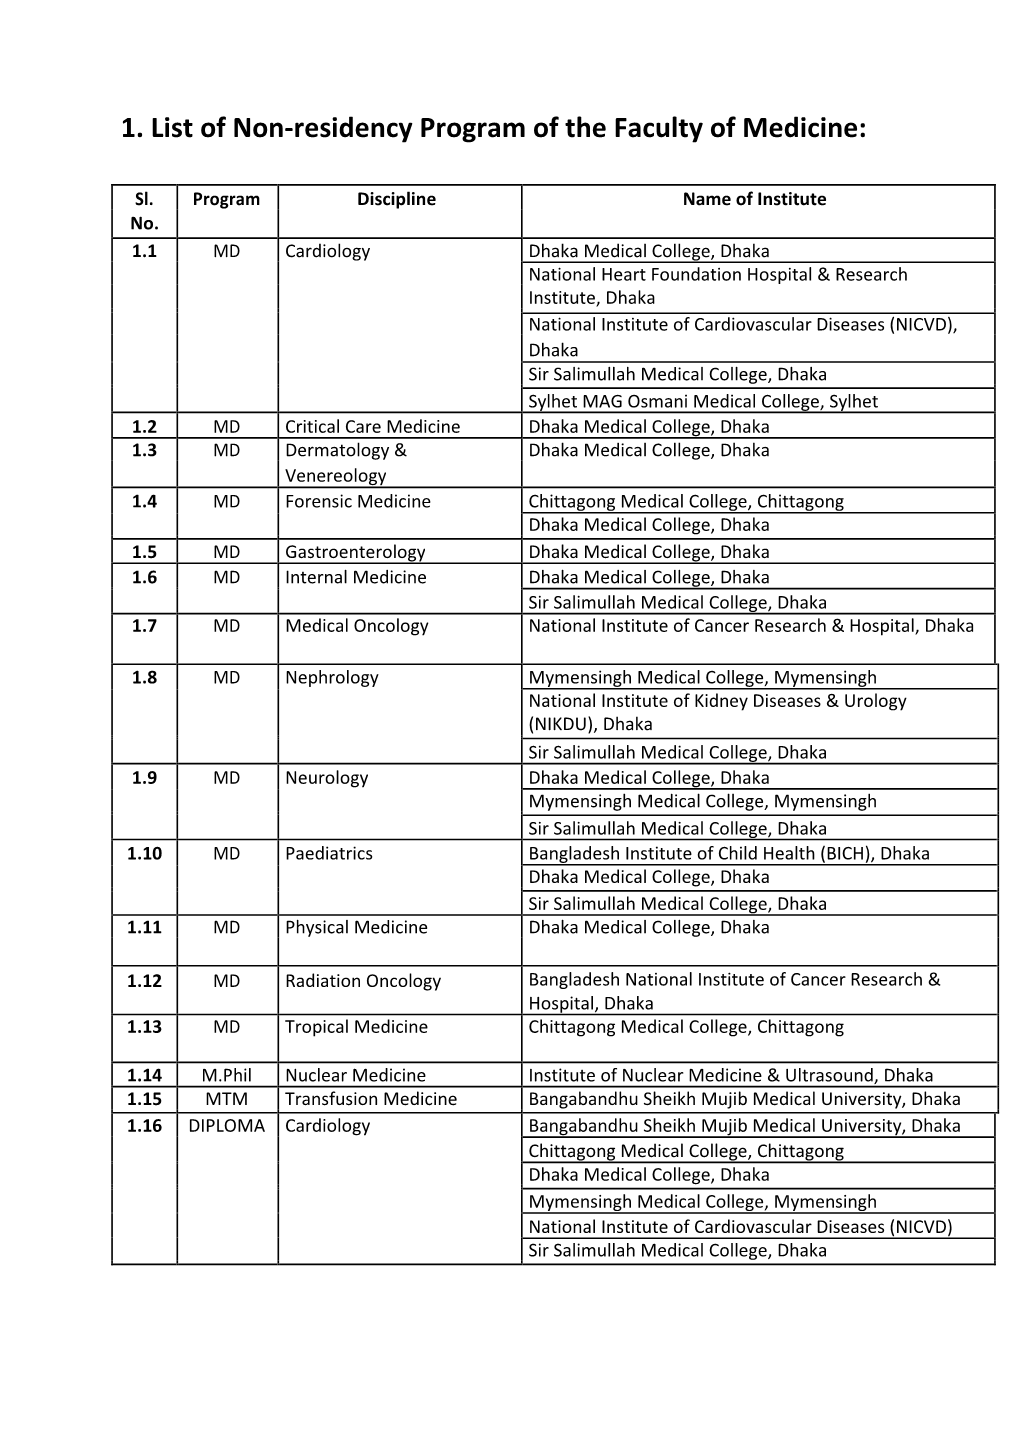 1. List of Non-Residency Program of the Faculty of Medicine